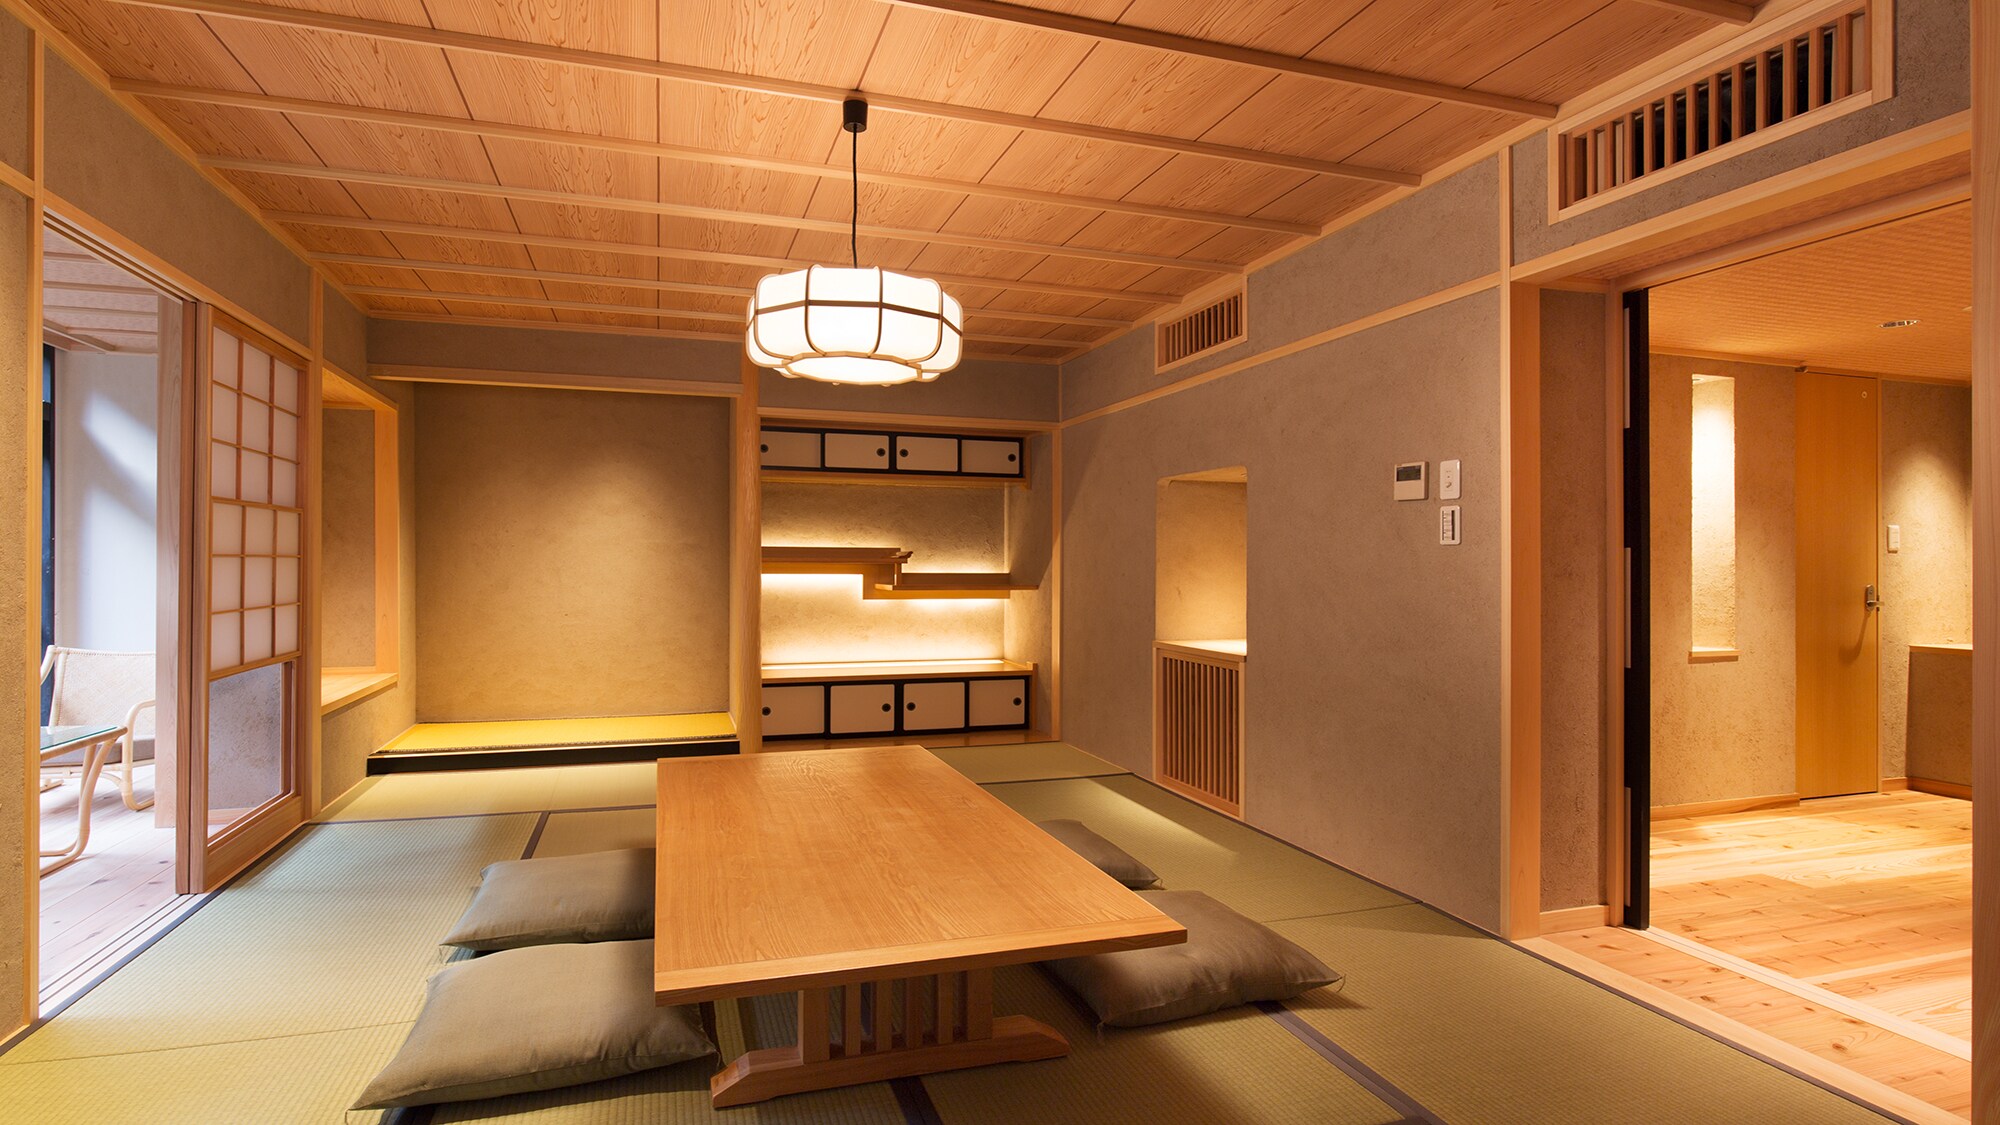 An example of the spacious Japanese-style room "Mugen-tei"♪ *The view and layout of each room are different♪